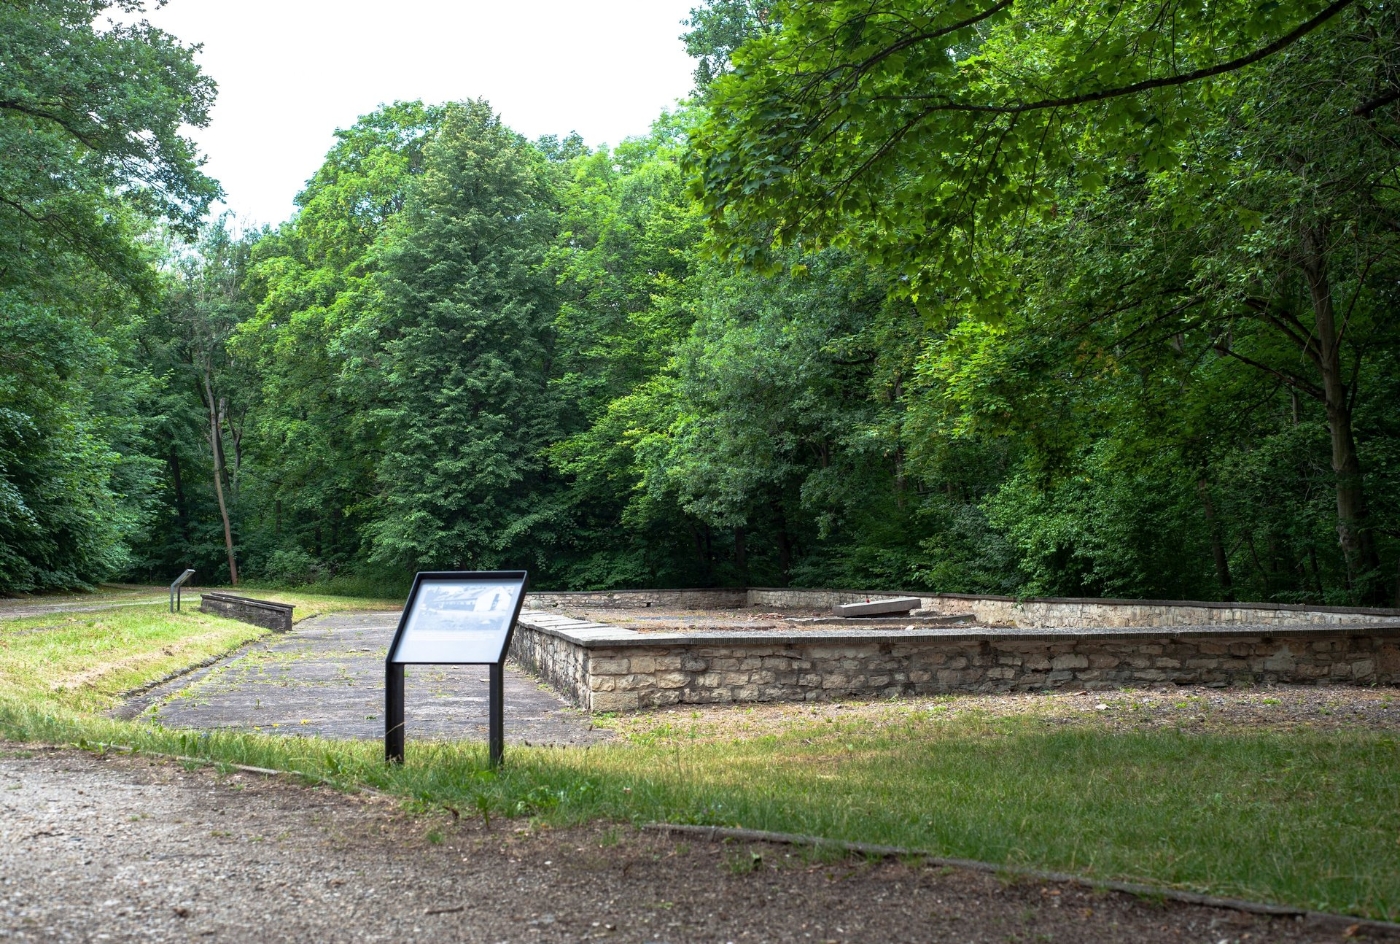 In the foreground, an info sign indicating that this is the site of the former horse stable. Further back the highlighted foundation walls of the stable, in the center of which is a memorial stone.